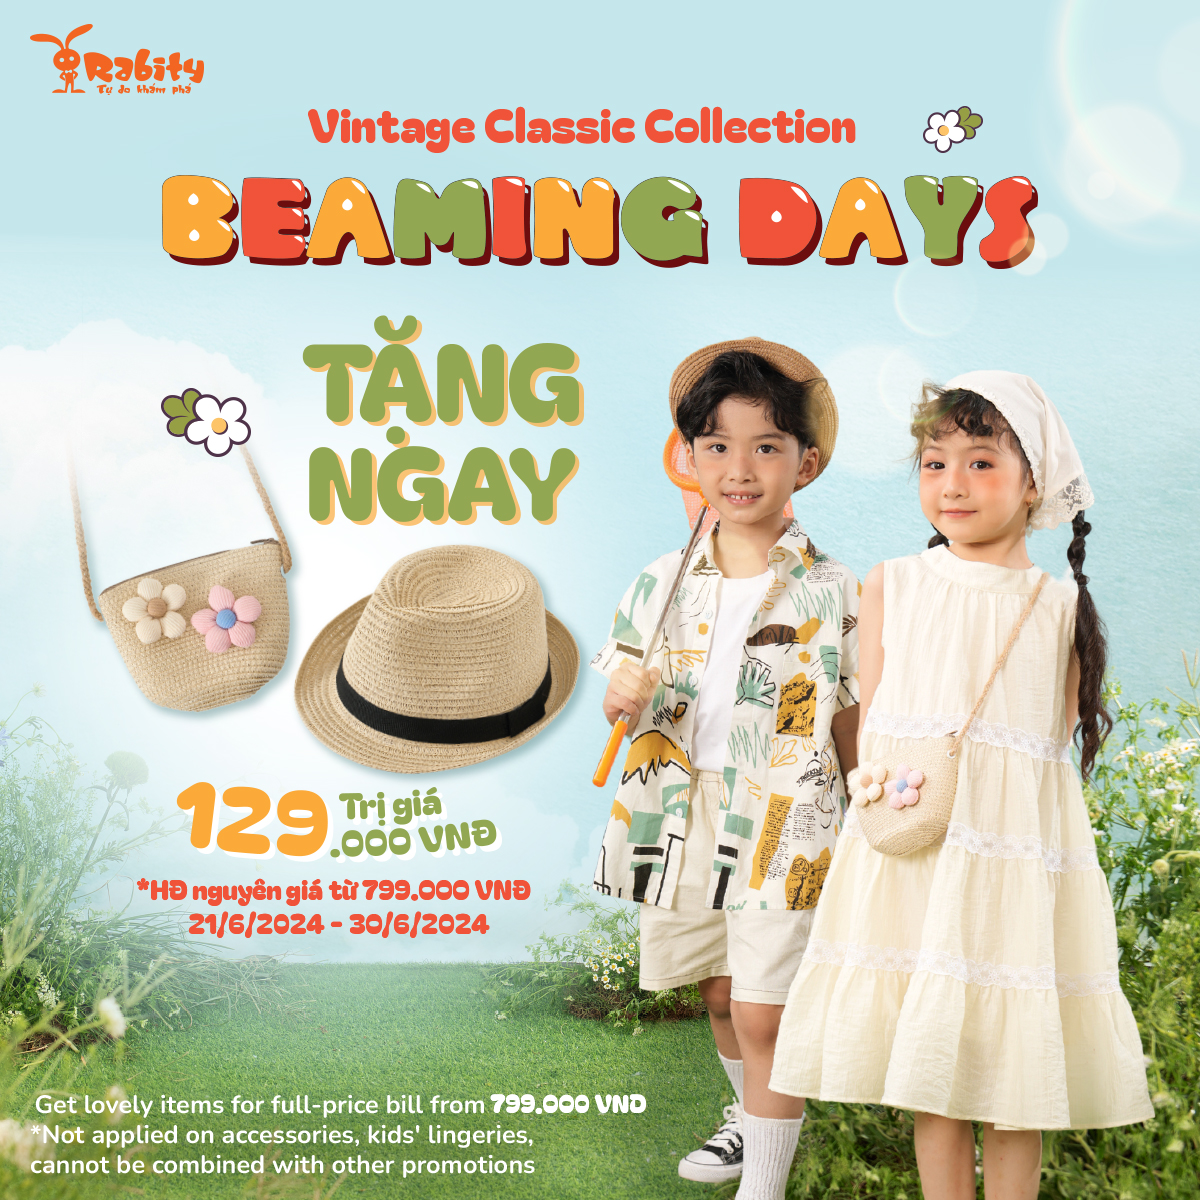 EXPLORING VINTAGE COLLECTION: BEAMING DAYS, GET LOVELY ACCESSORIES